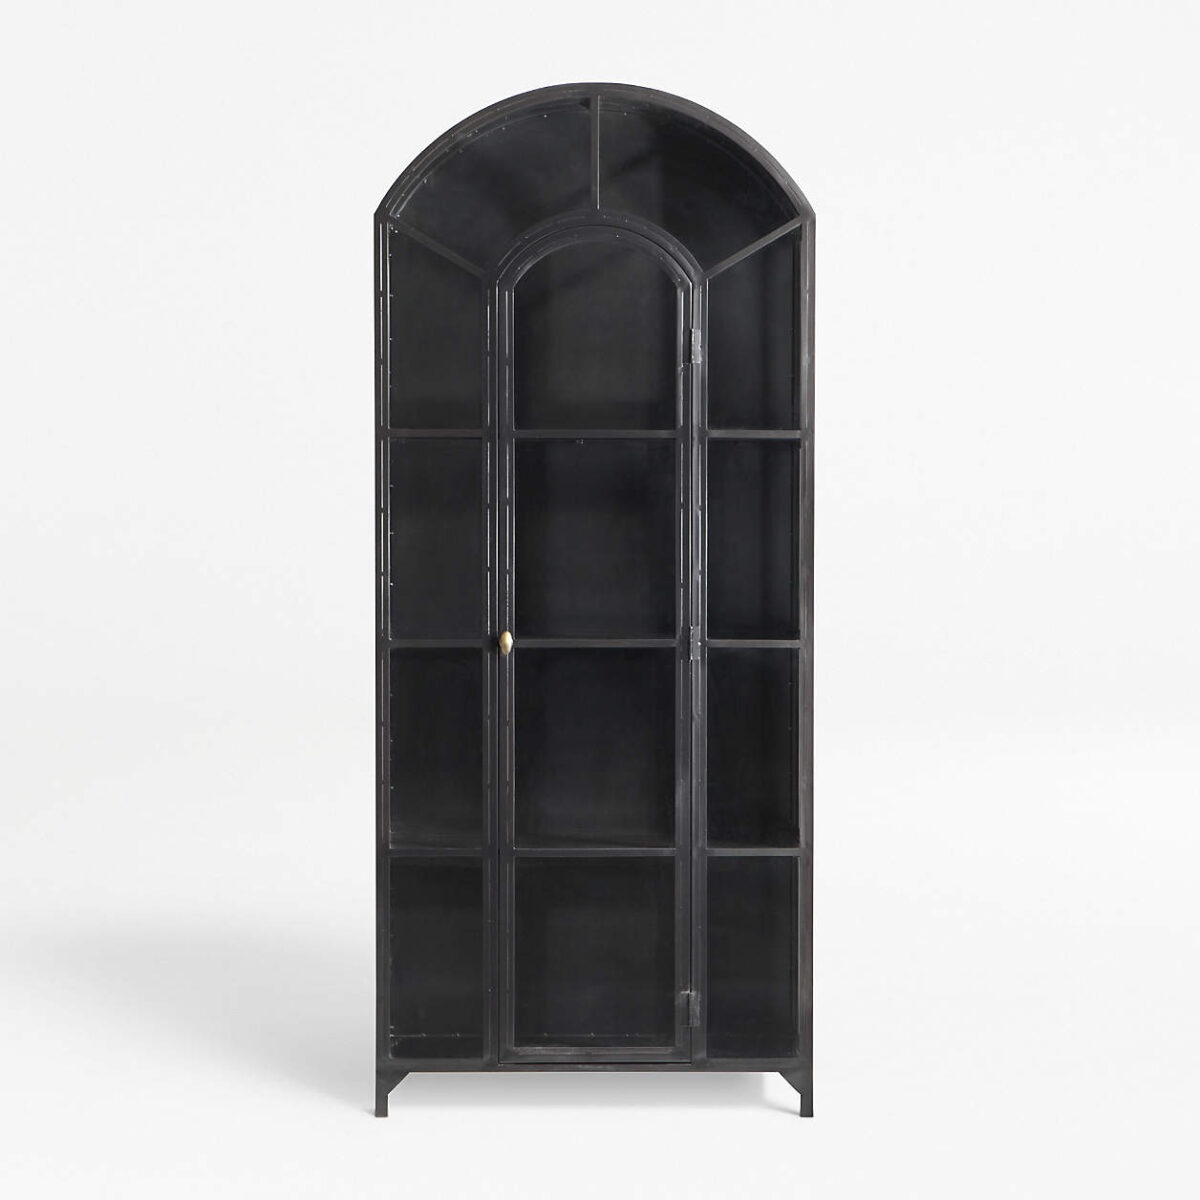 The Best Modern Glass Door Cabinets, Black Display Cabinets and Arched Cabinets in 2021 from Crate & Barrel